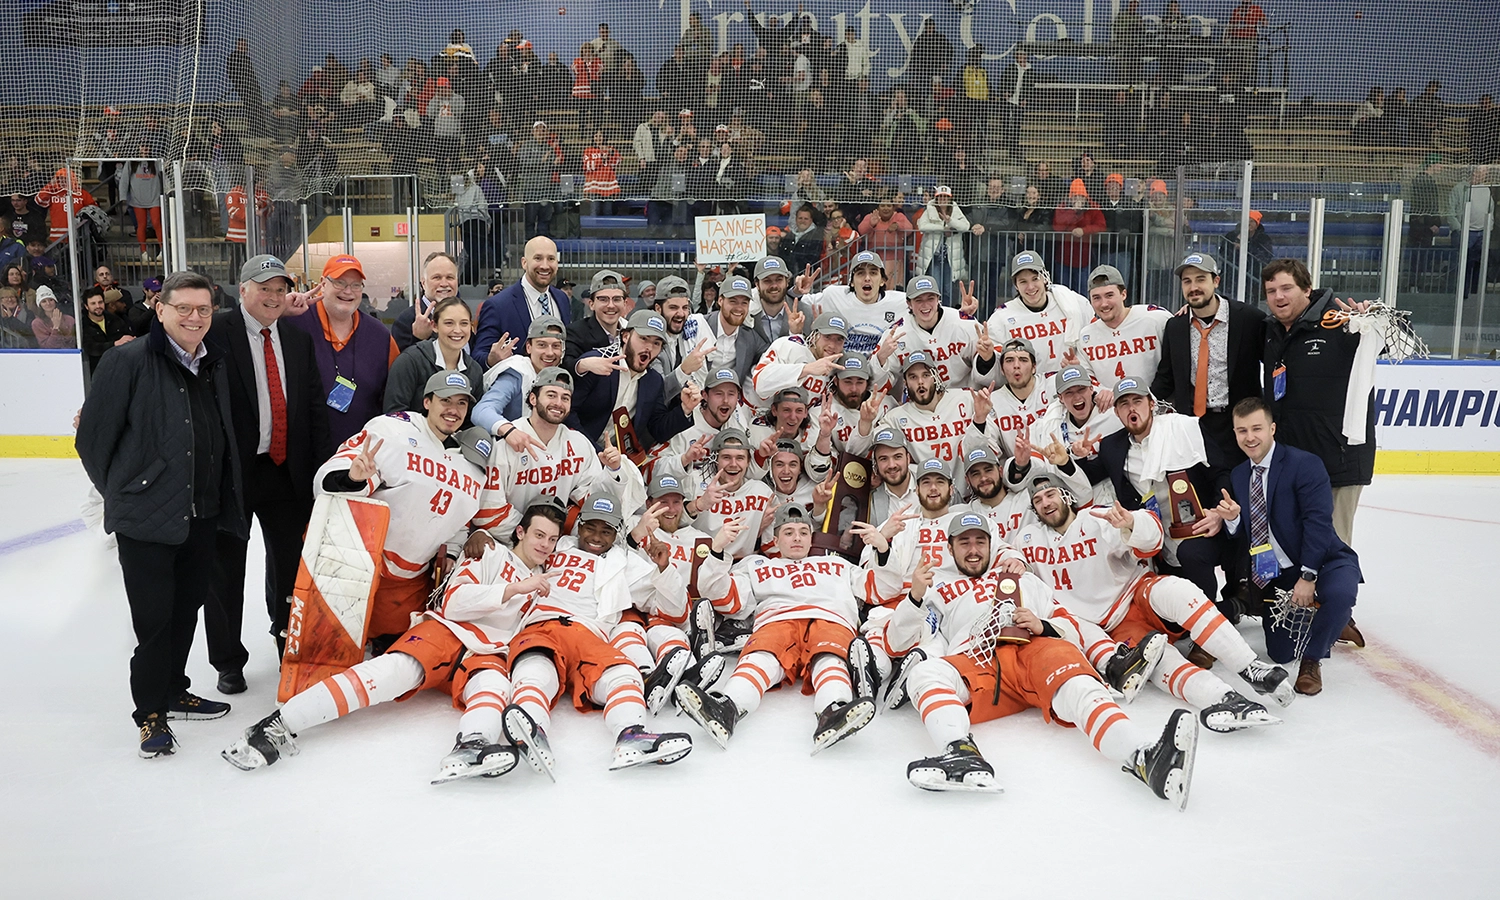 In This Week in Photos, we highlight Hobart Hockey’s run to a second consecutive NCAA Division III national championship. Here, the team poses with the trophy.